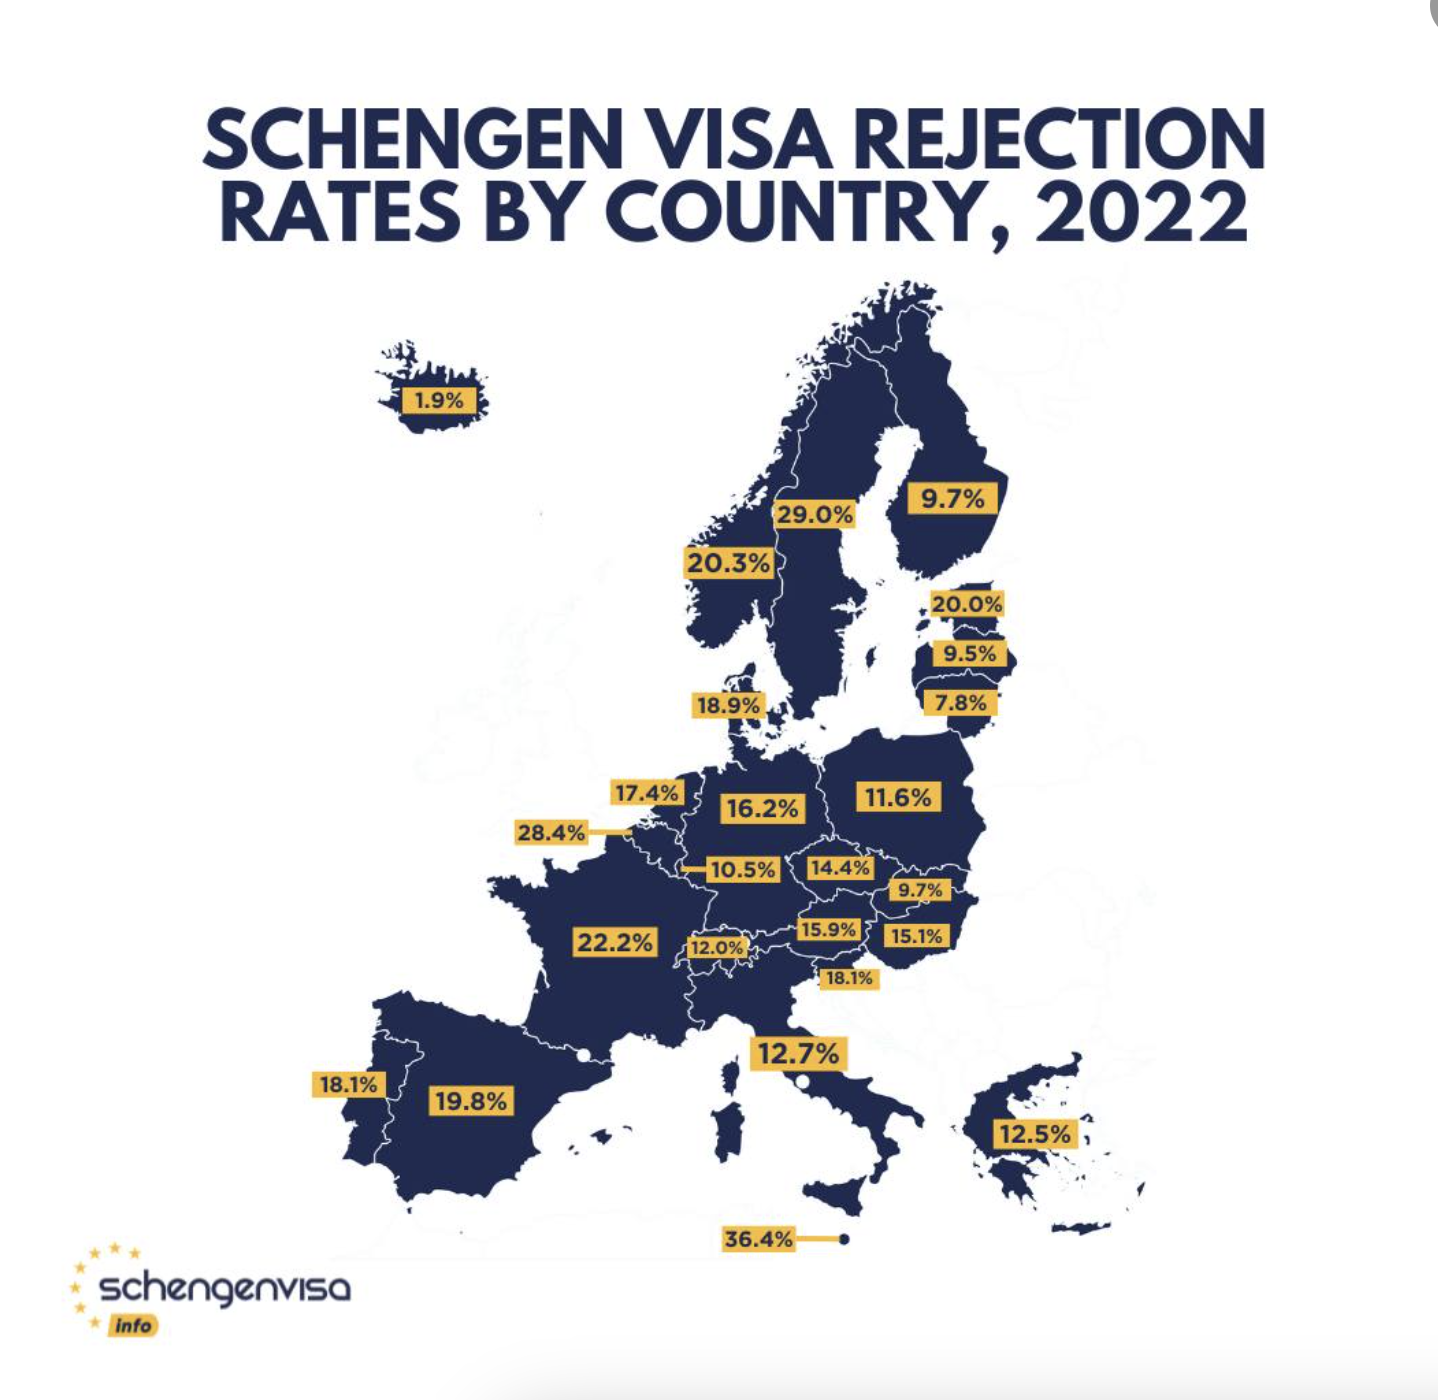 Schengen Visa Rejection Rates Visas and migration to other countries